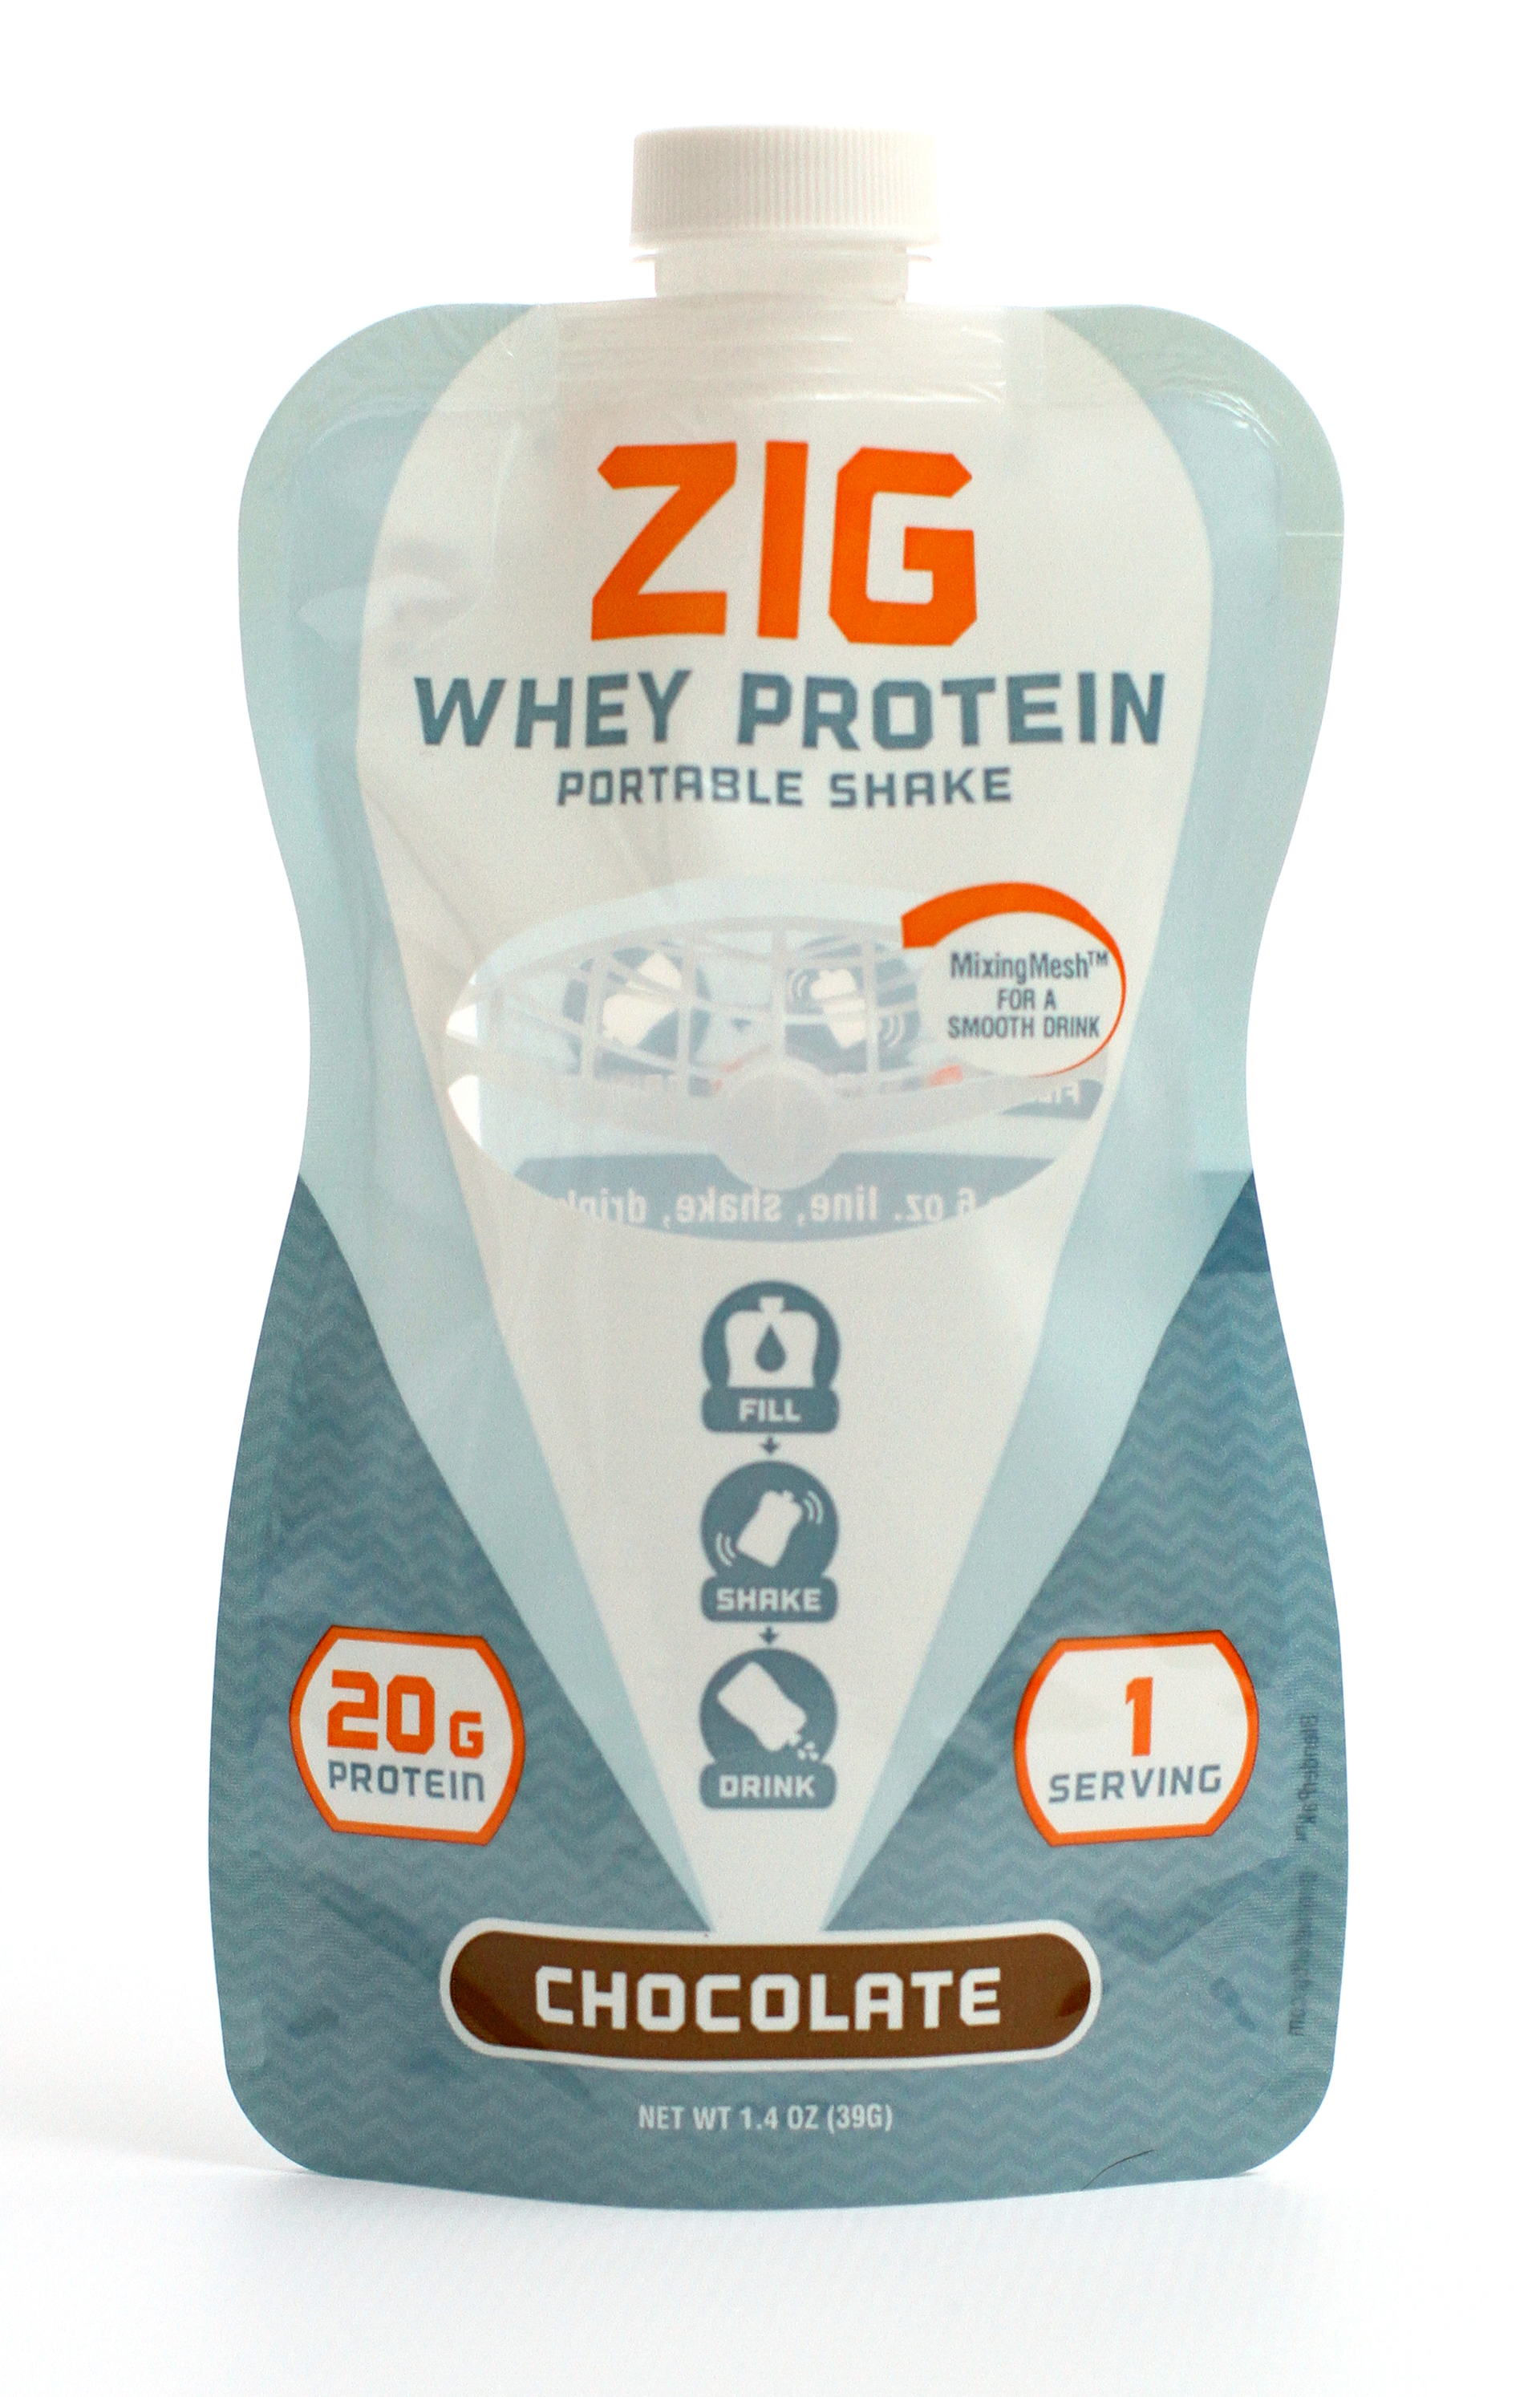 ZIG Chocolate Protein Shake offers 20 grams of premium whey protein per serving.